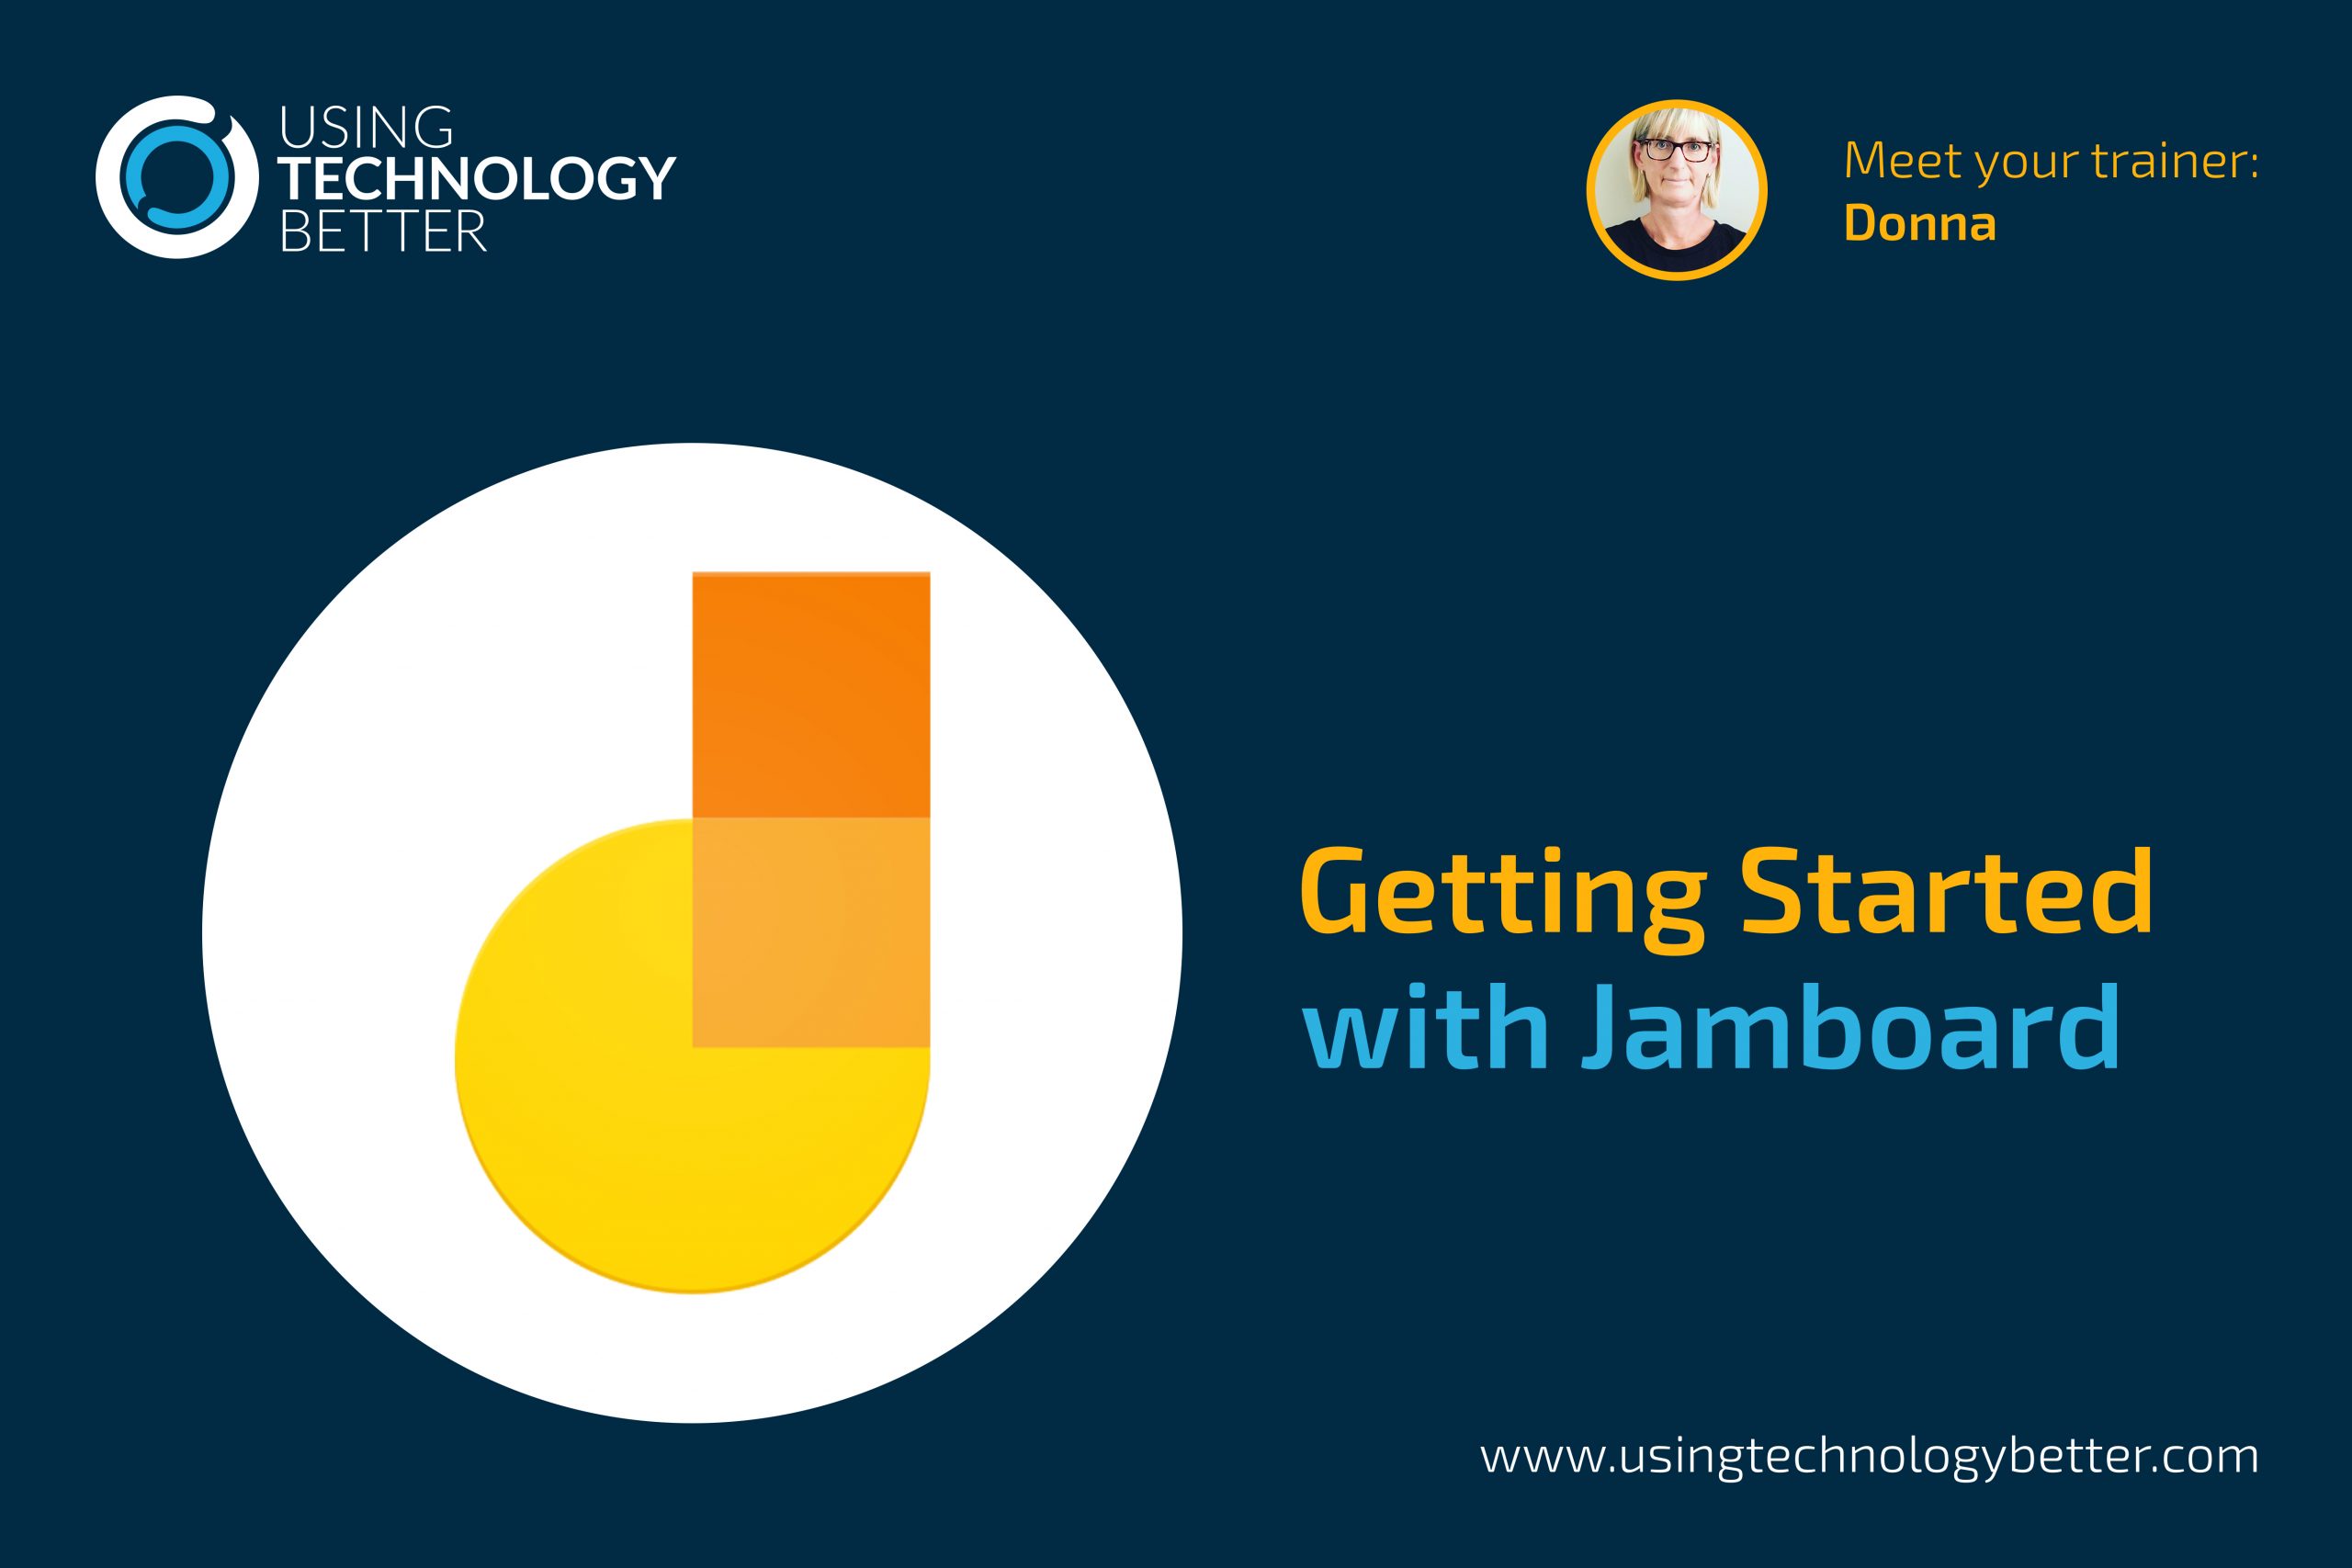 Jamboard is now a core G Suite app, yet it’s amazing